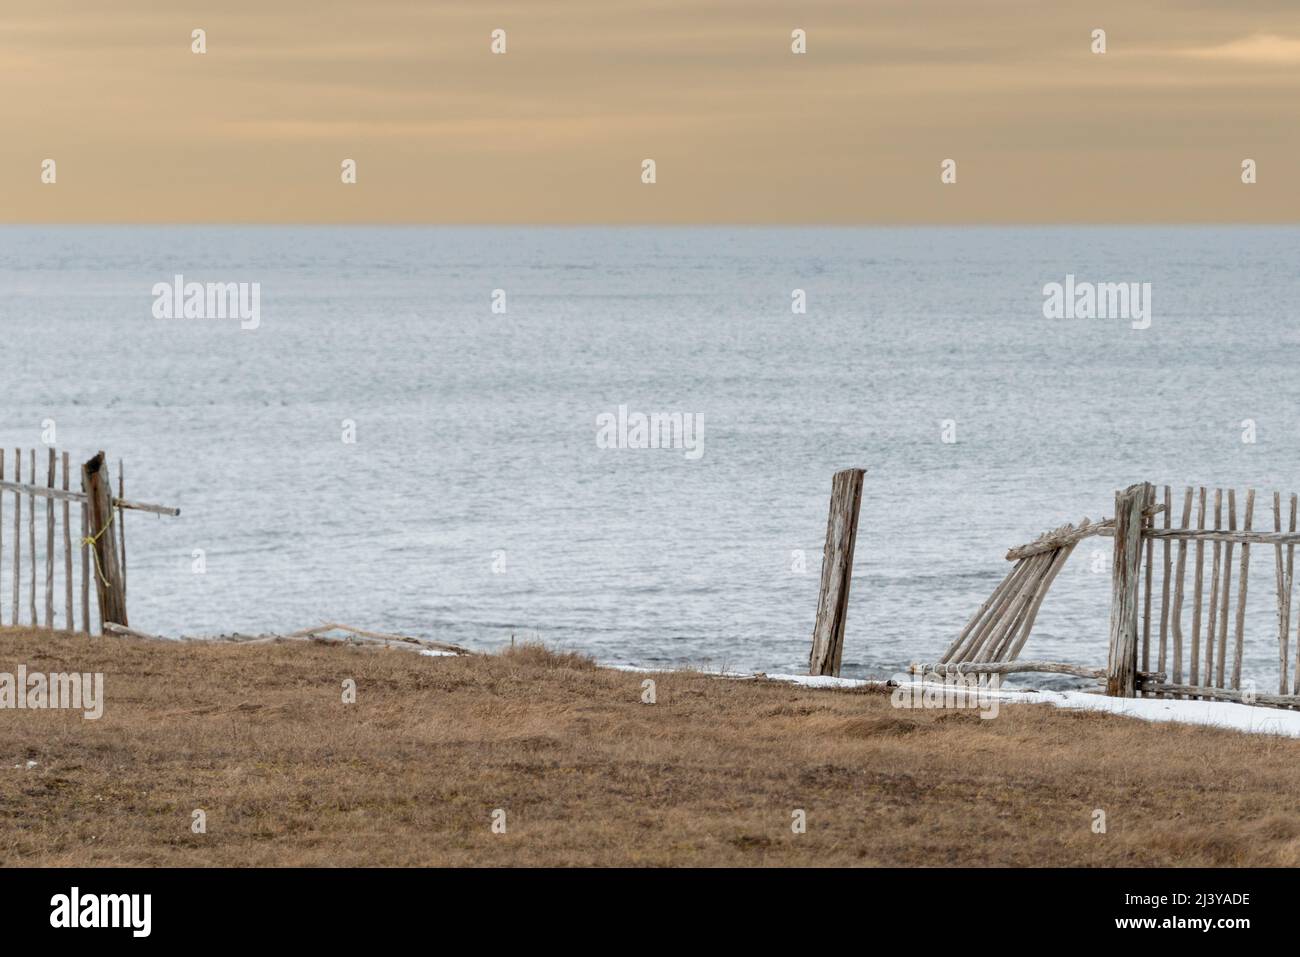 A broken fence on the edge of a cliff overlooking the ocean. The wooden fence is made of wood sticks. The ocean is calm and pale blue and sky yellow. Stock Photo